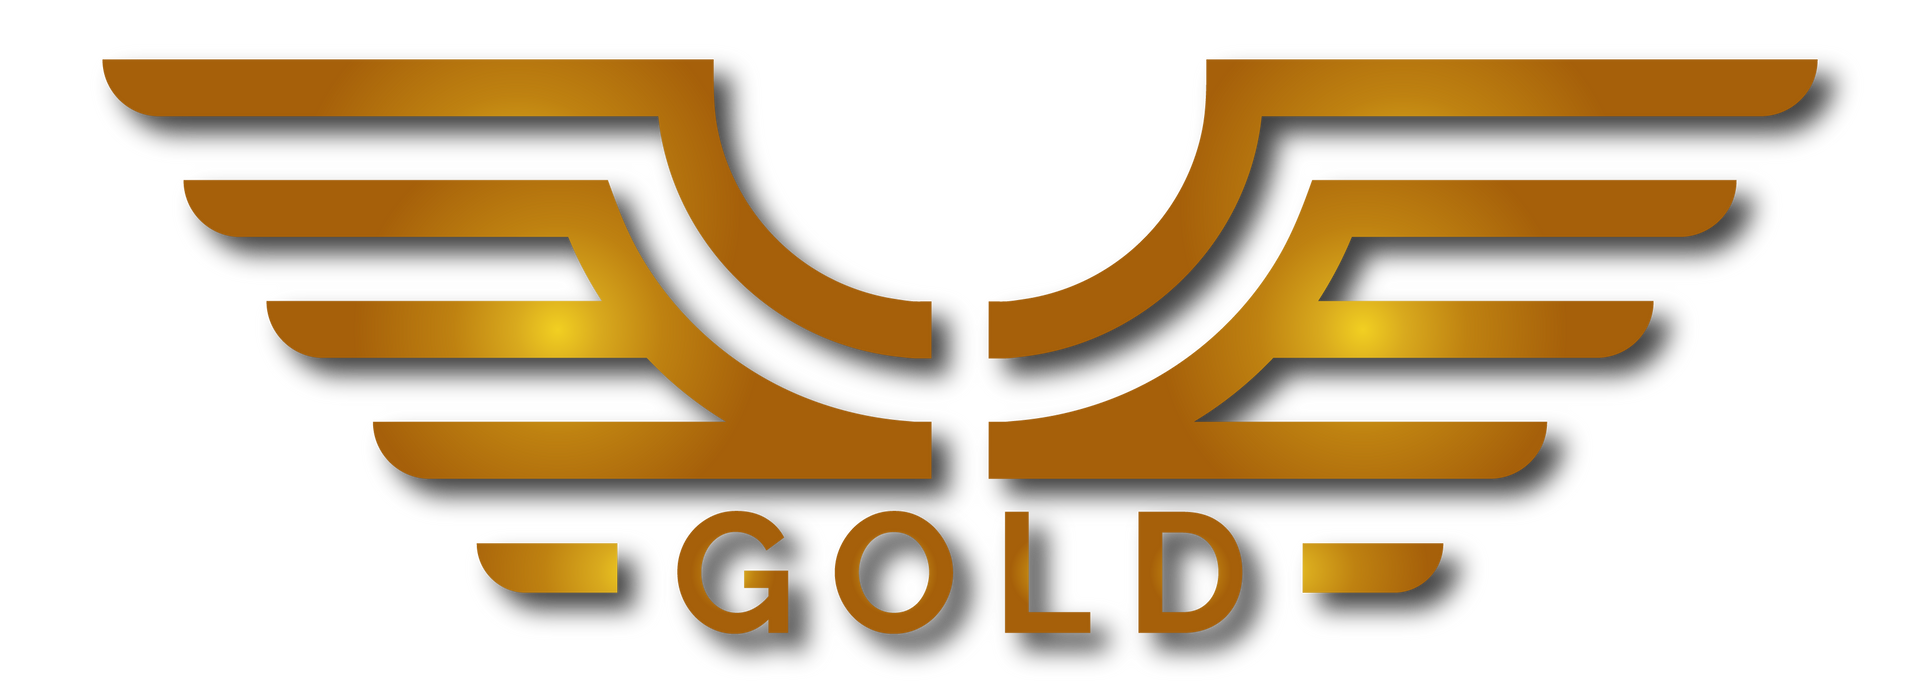 a gold logo with wings and the word gold on a white background .